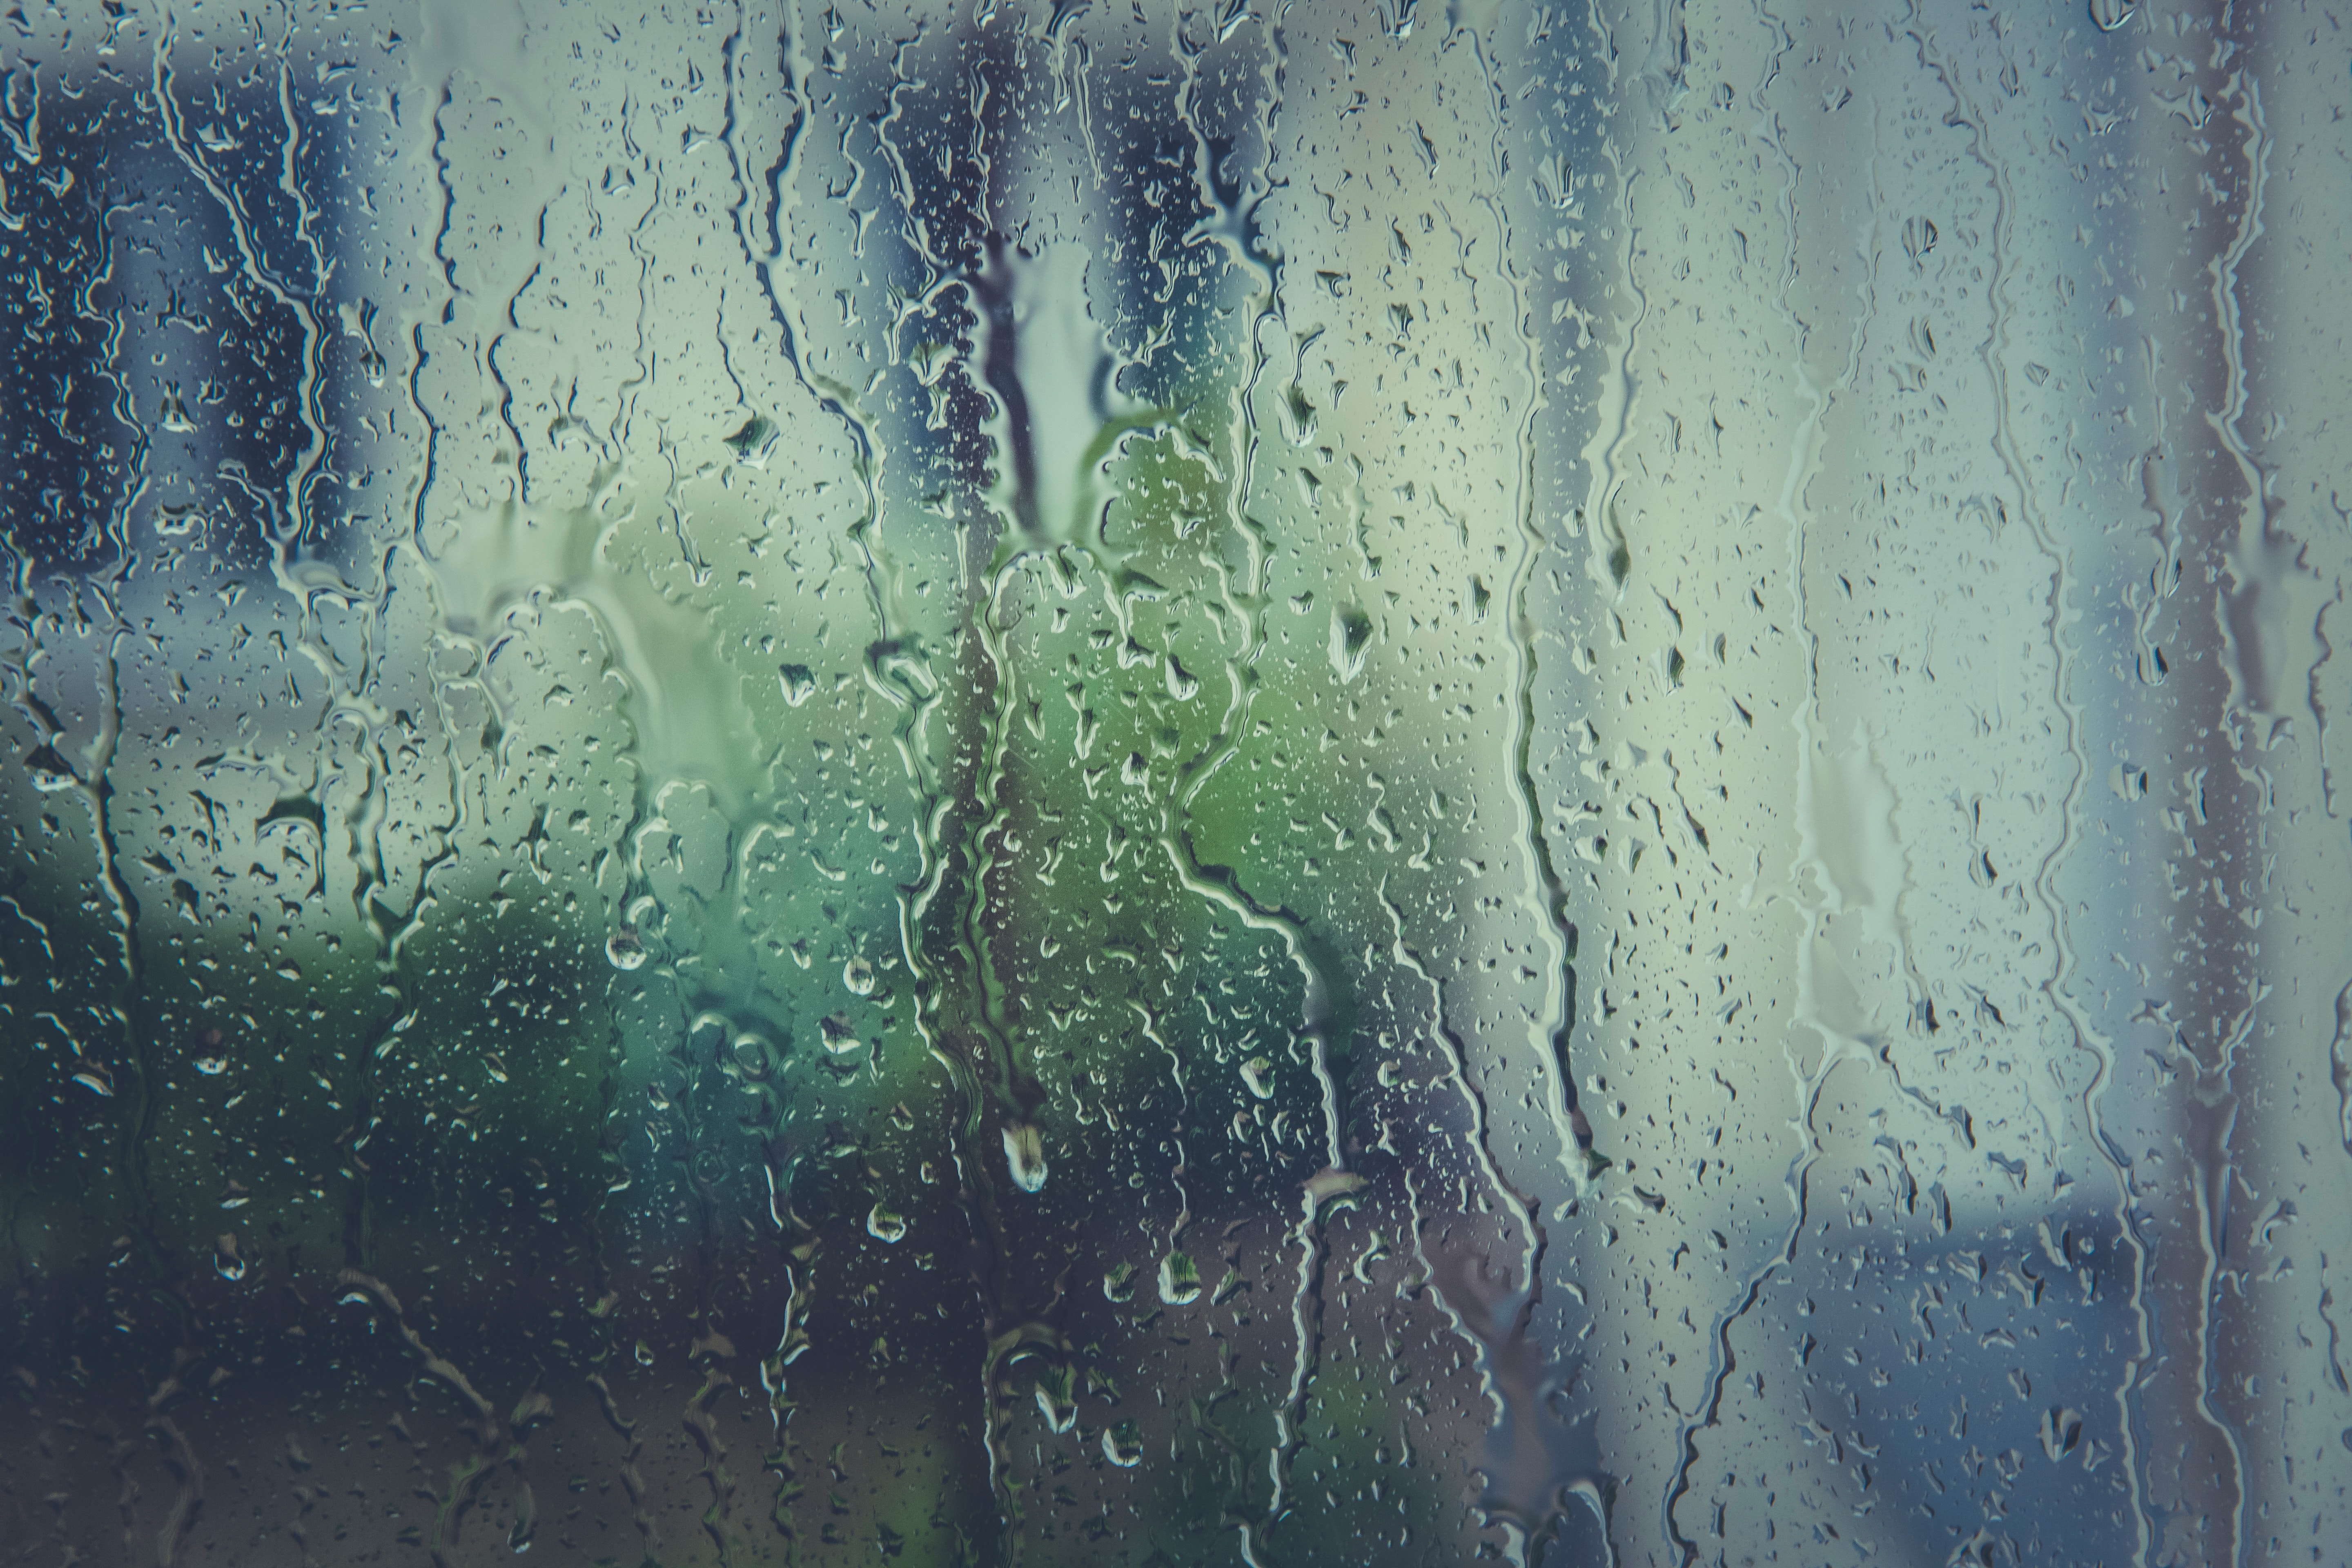 Best Free Rainy Day & Image · 100% Royalty Free HD Downloads